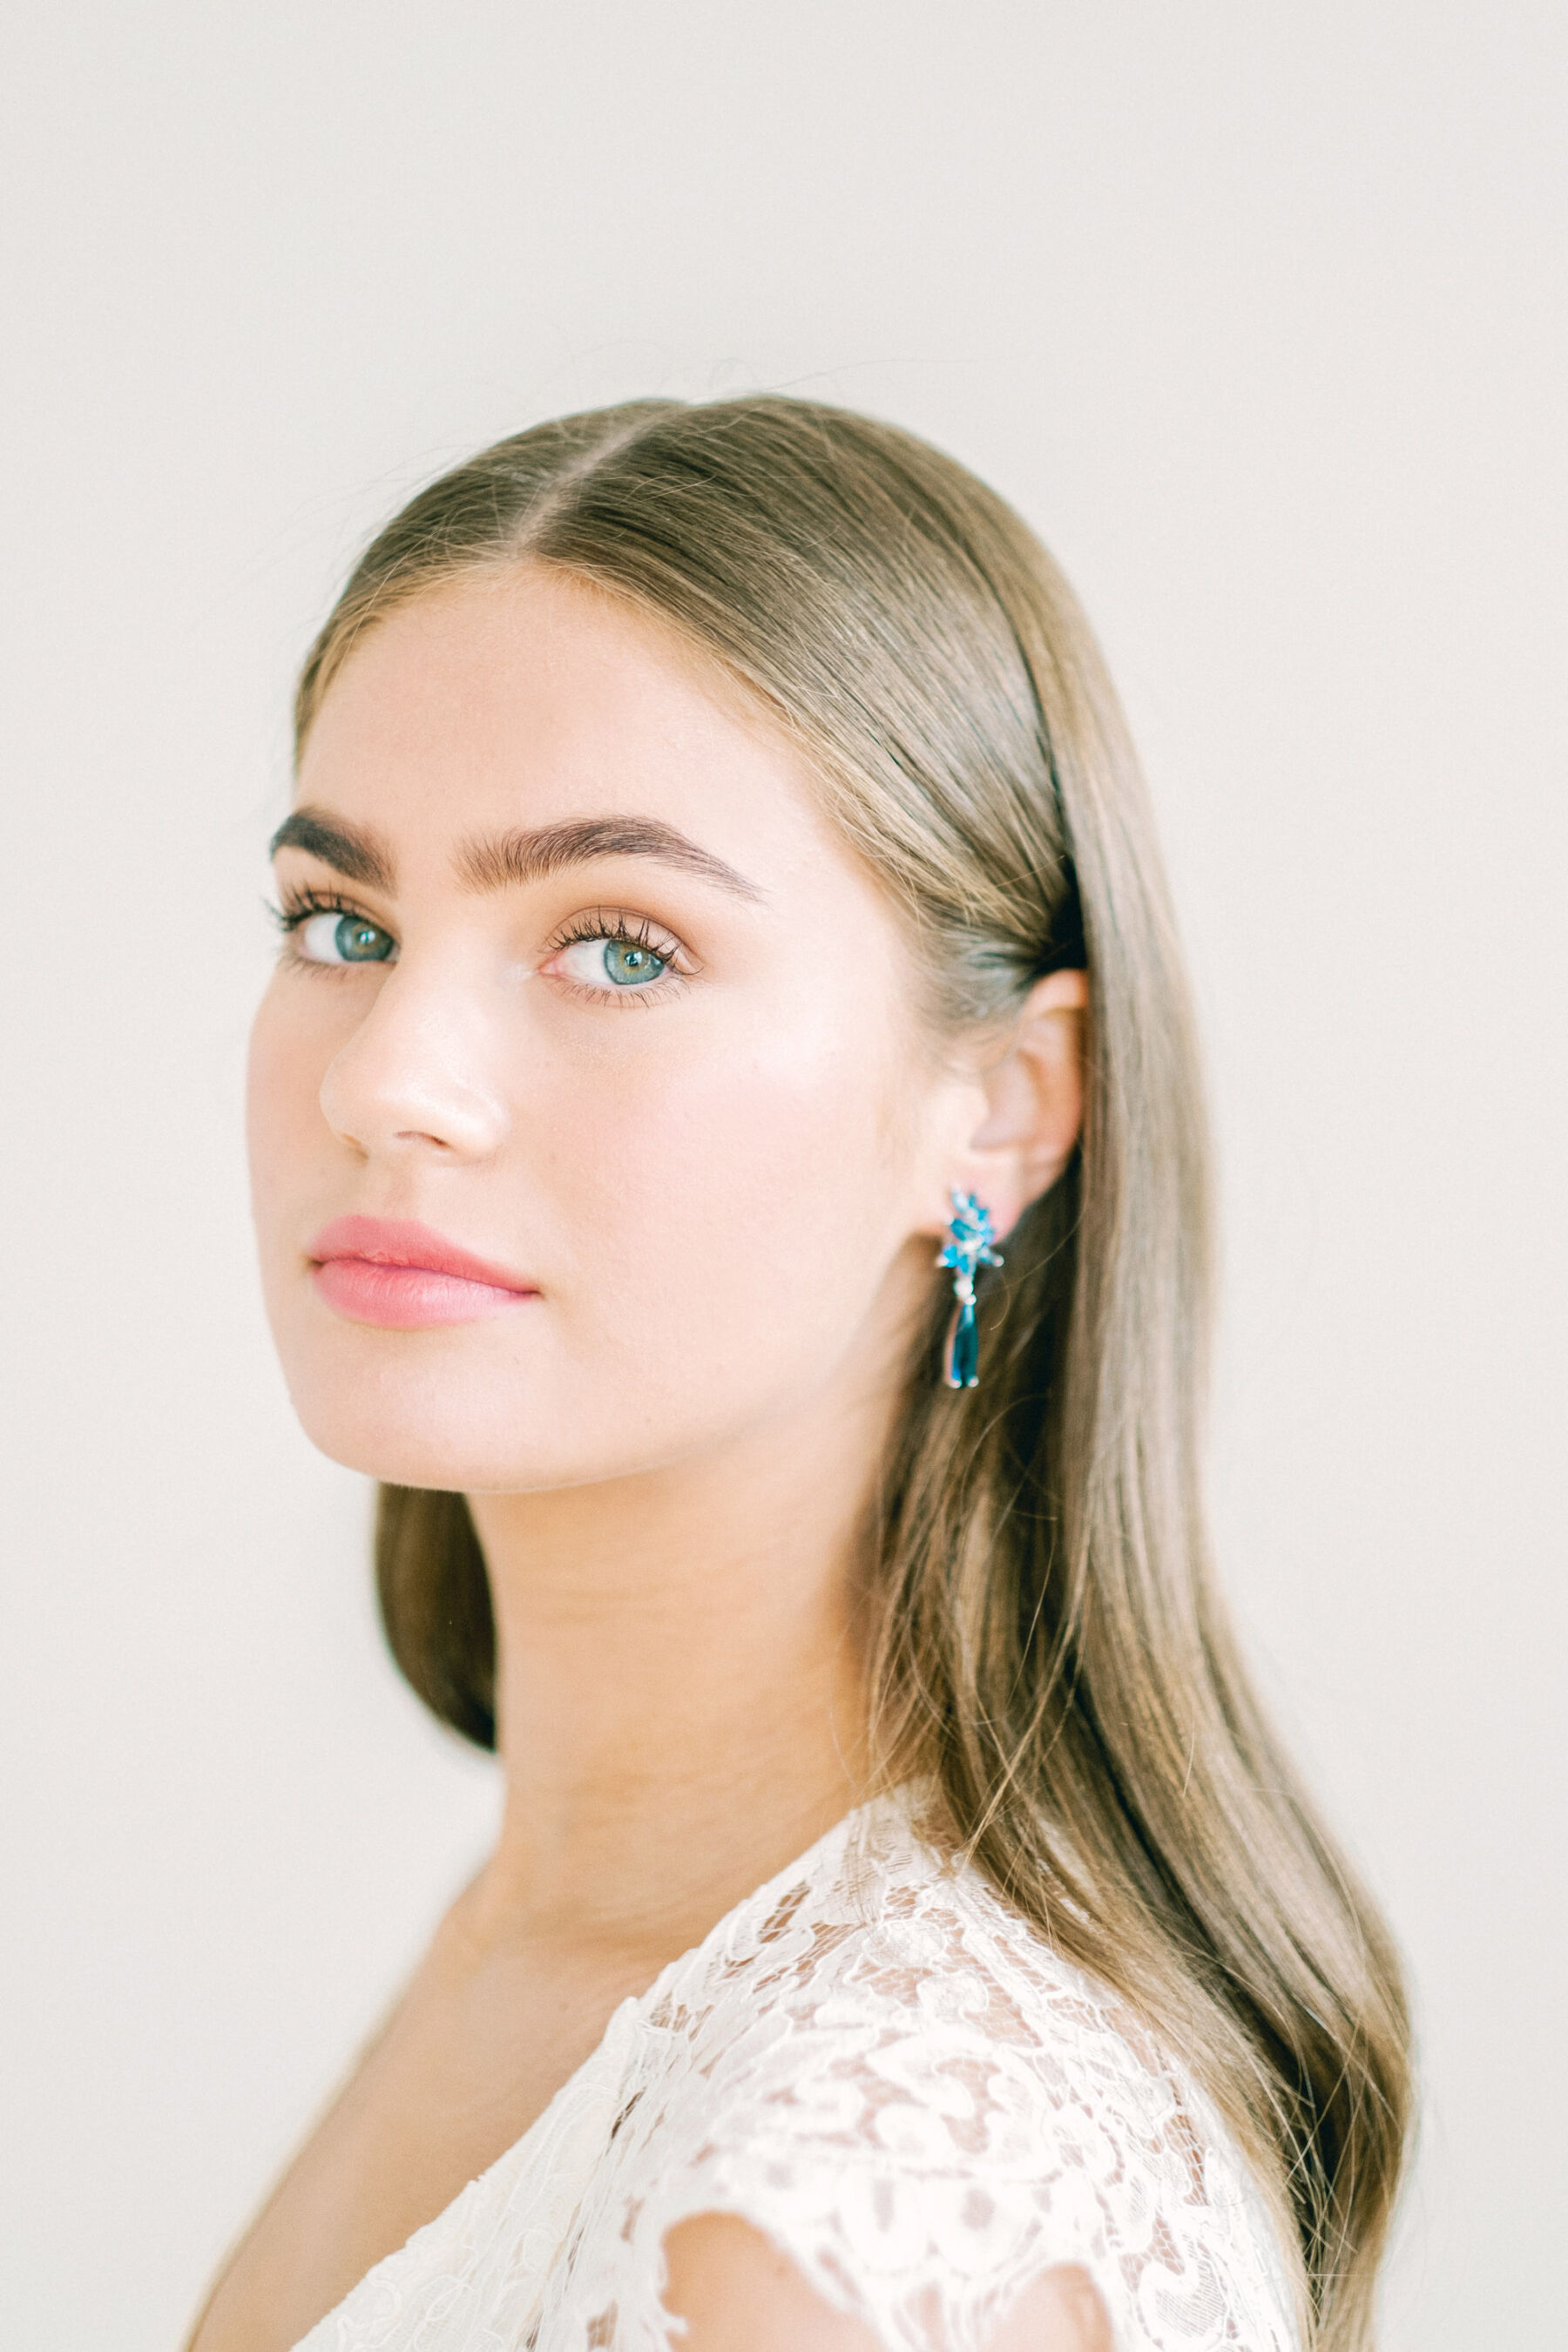 Face portrait of elegant bride with centre parting and long brown hair wearing blue drop earrings.